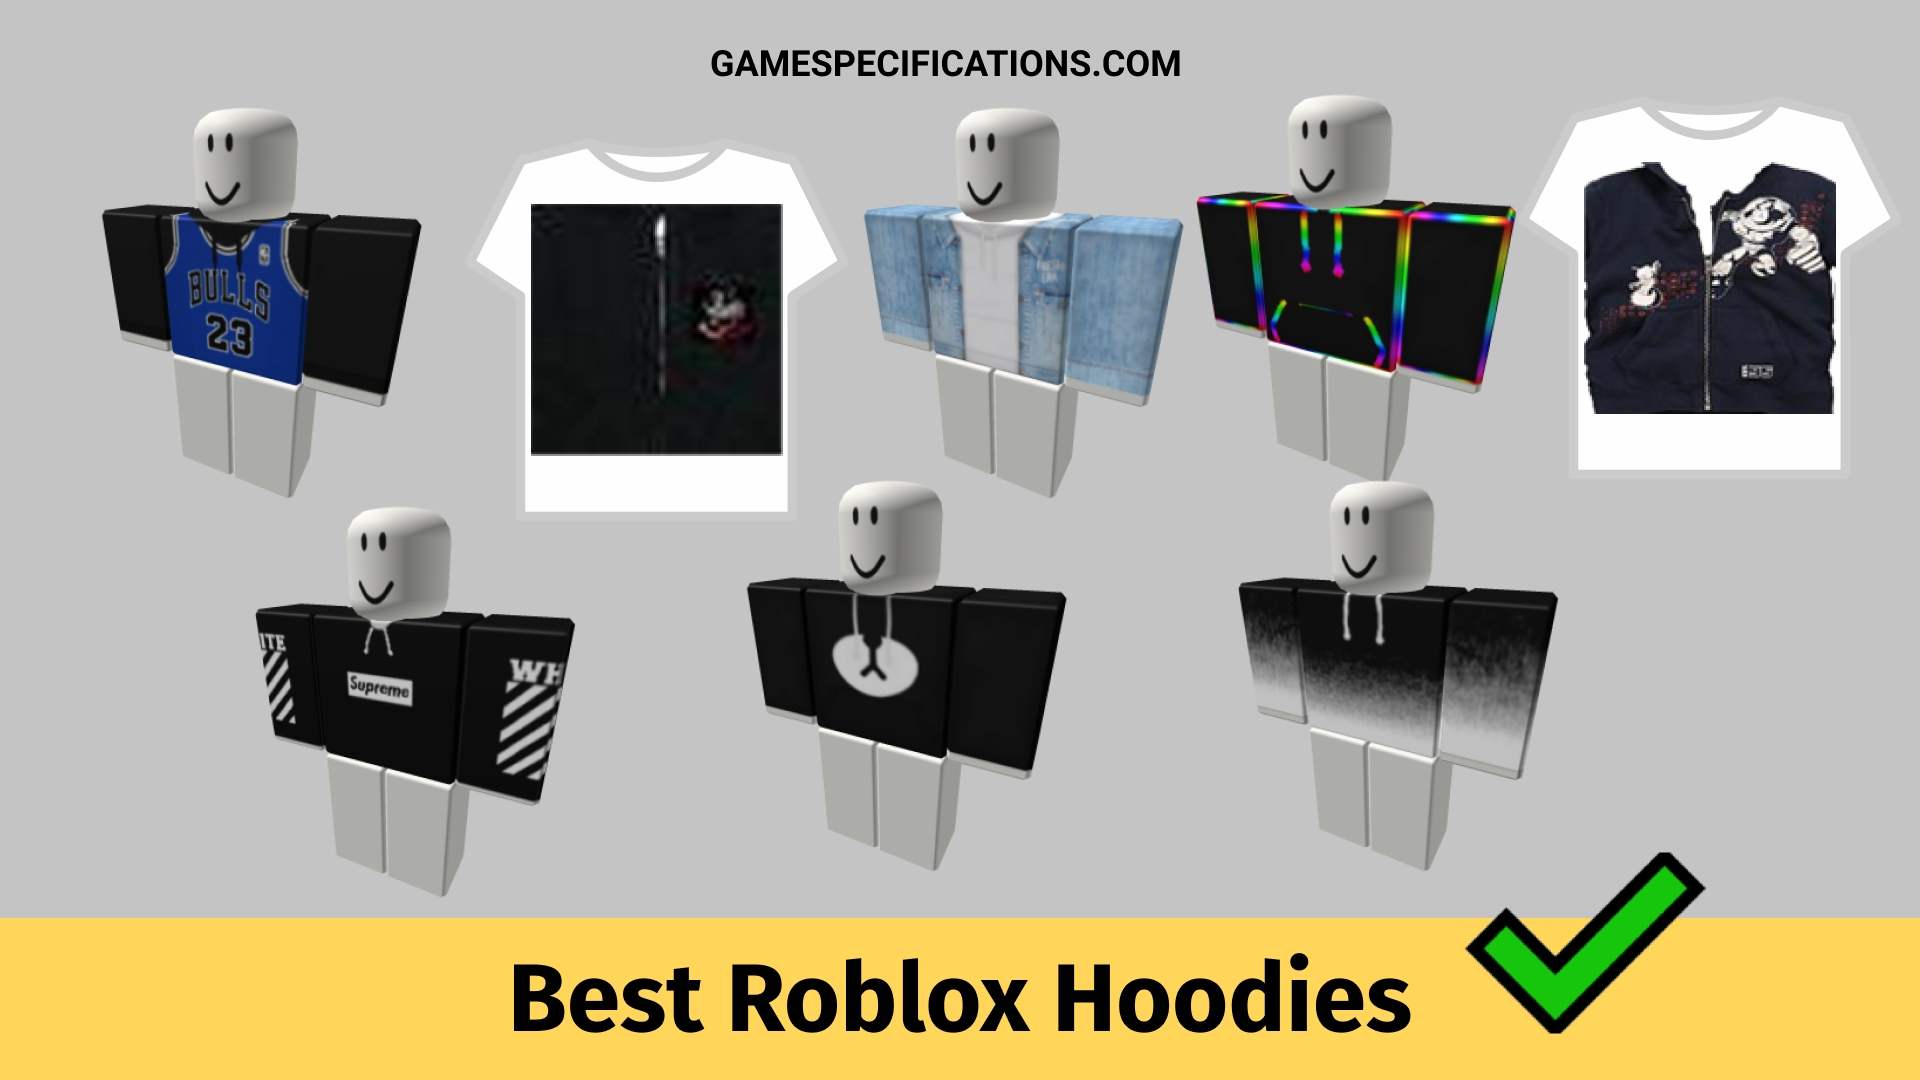 17 Best Roblox Hoodies To Look Good | Free, Cheap & Aesthetic - Game  Specifications